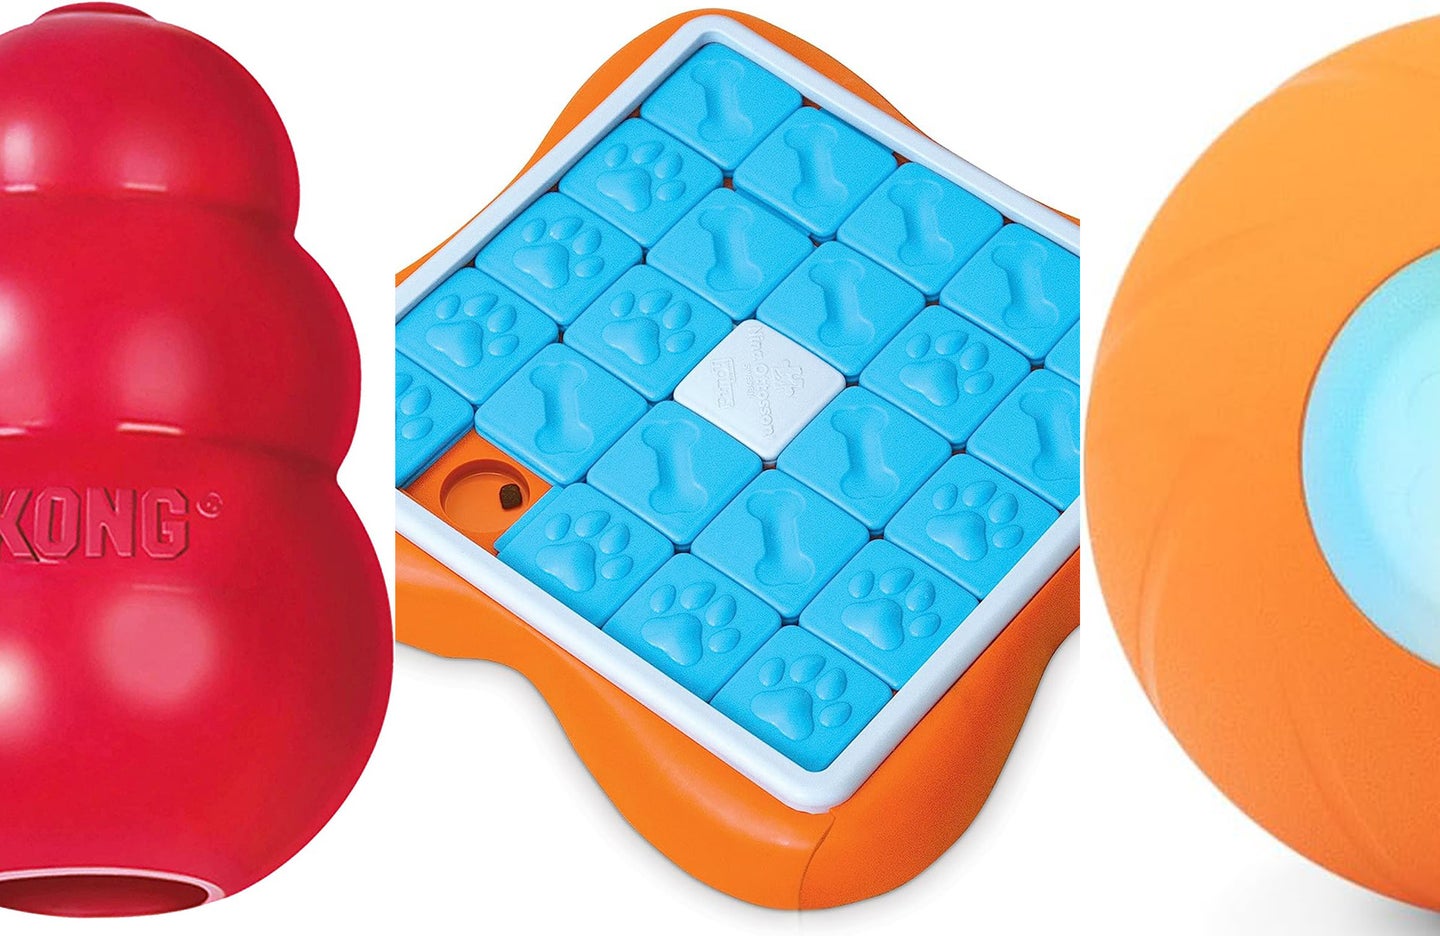 The best interactive dog toys will keep your pooch entertained even when you're not around.